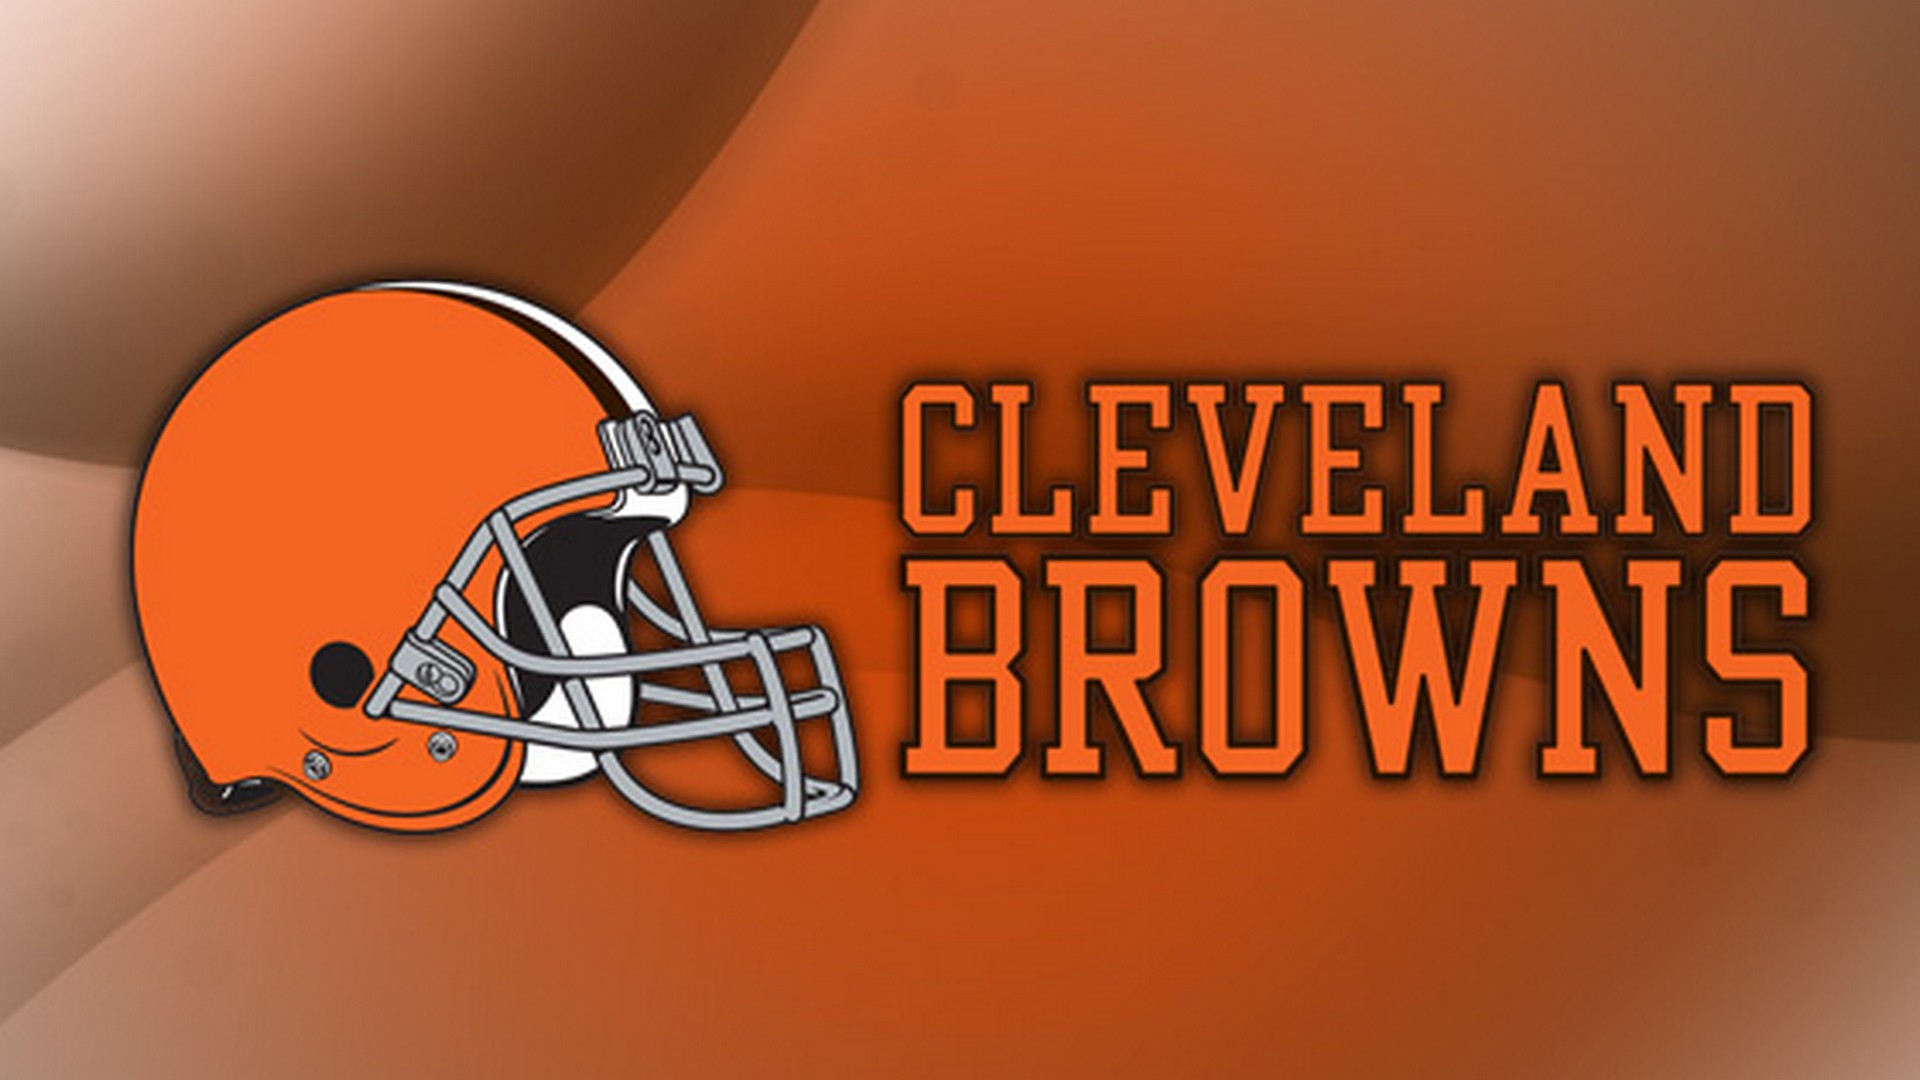 HD Backgrounds Cleveland Browns 1920x1080